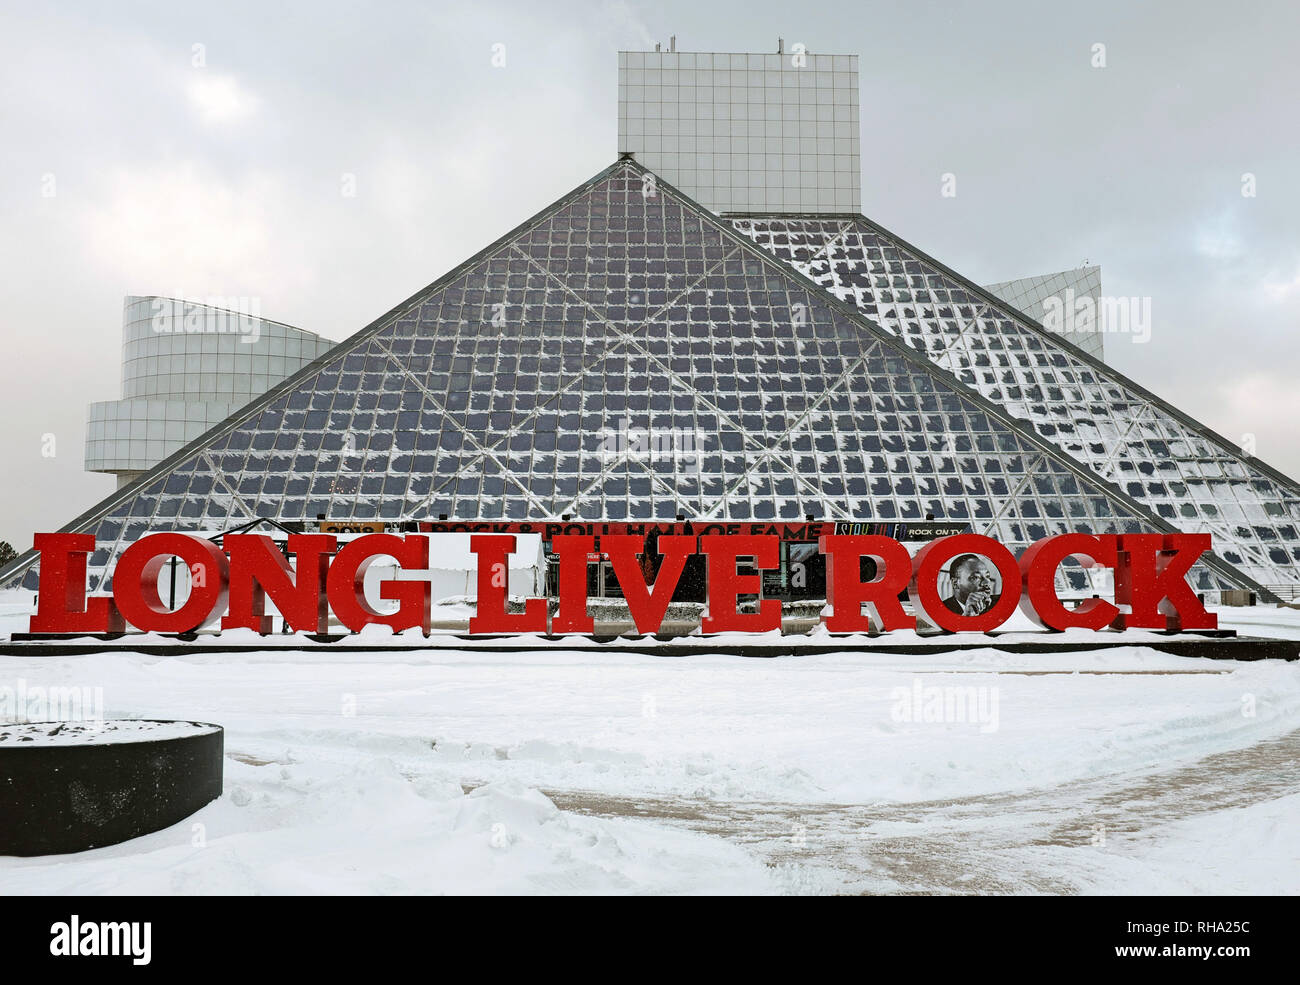 The Rock and Roll Hall of Fame in Cleveland, Ohio, USA after a winter storm with iced windows and a snowy plaza in front of the I.M. Pei building. Stock Photo